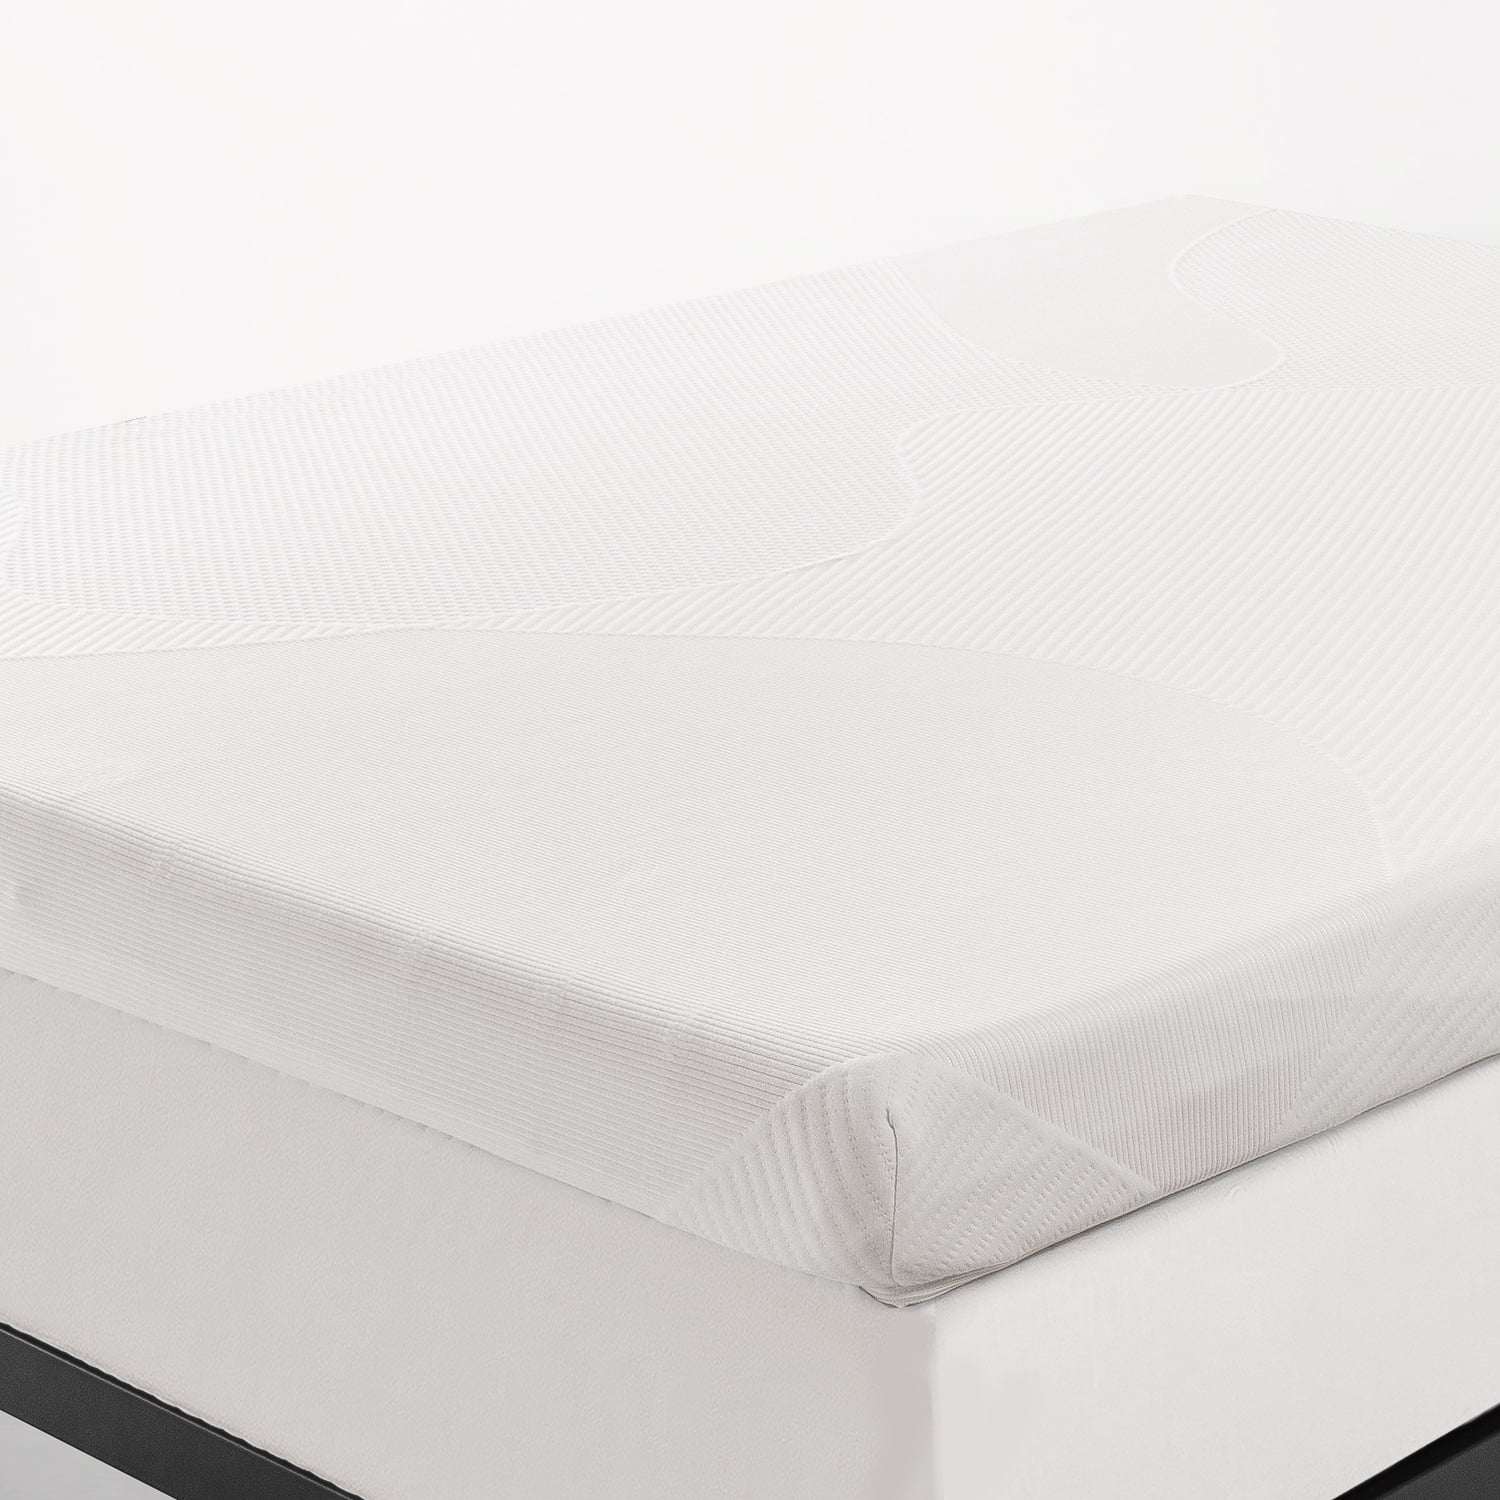 Details about   Memory Foam Mattress Topper  4" Spa Sensations Theratouch Comfort Support NEW 